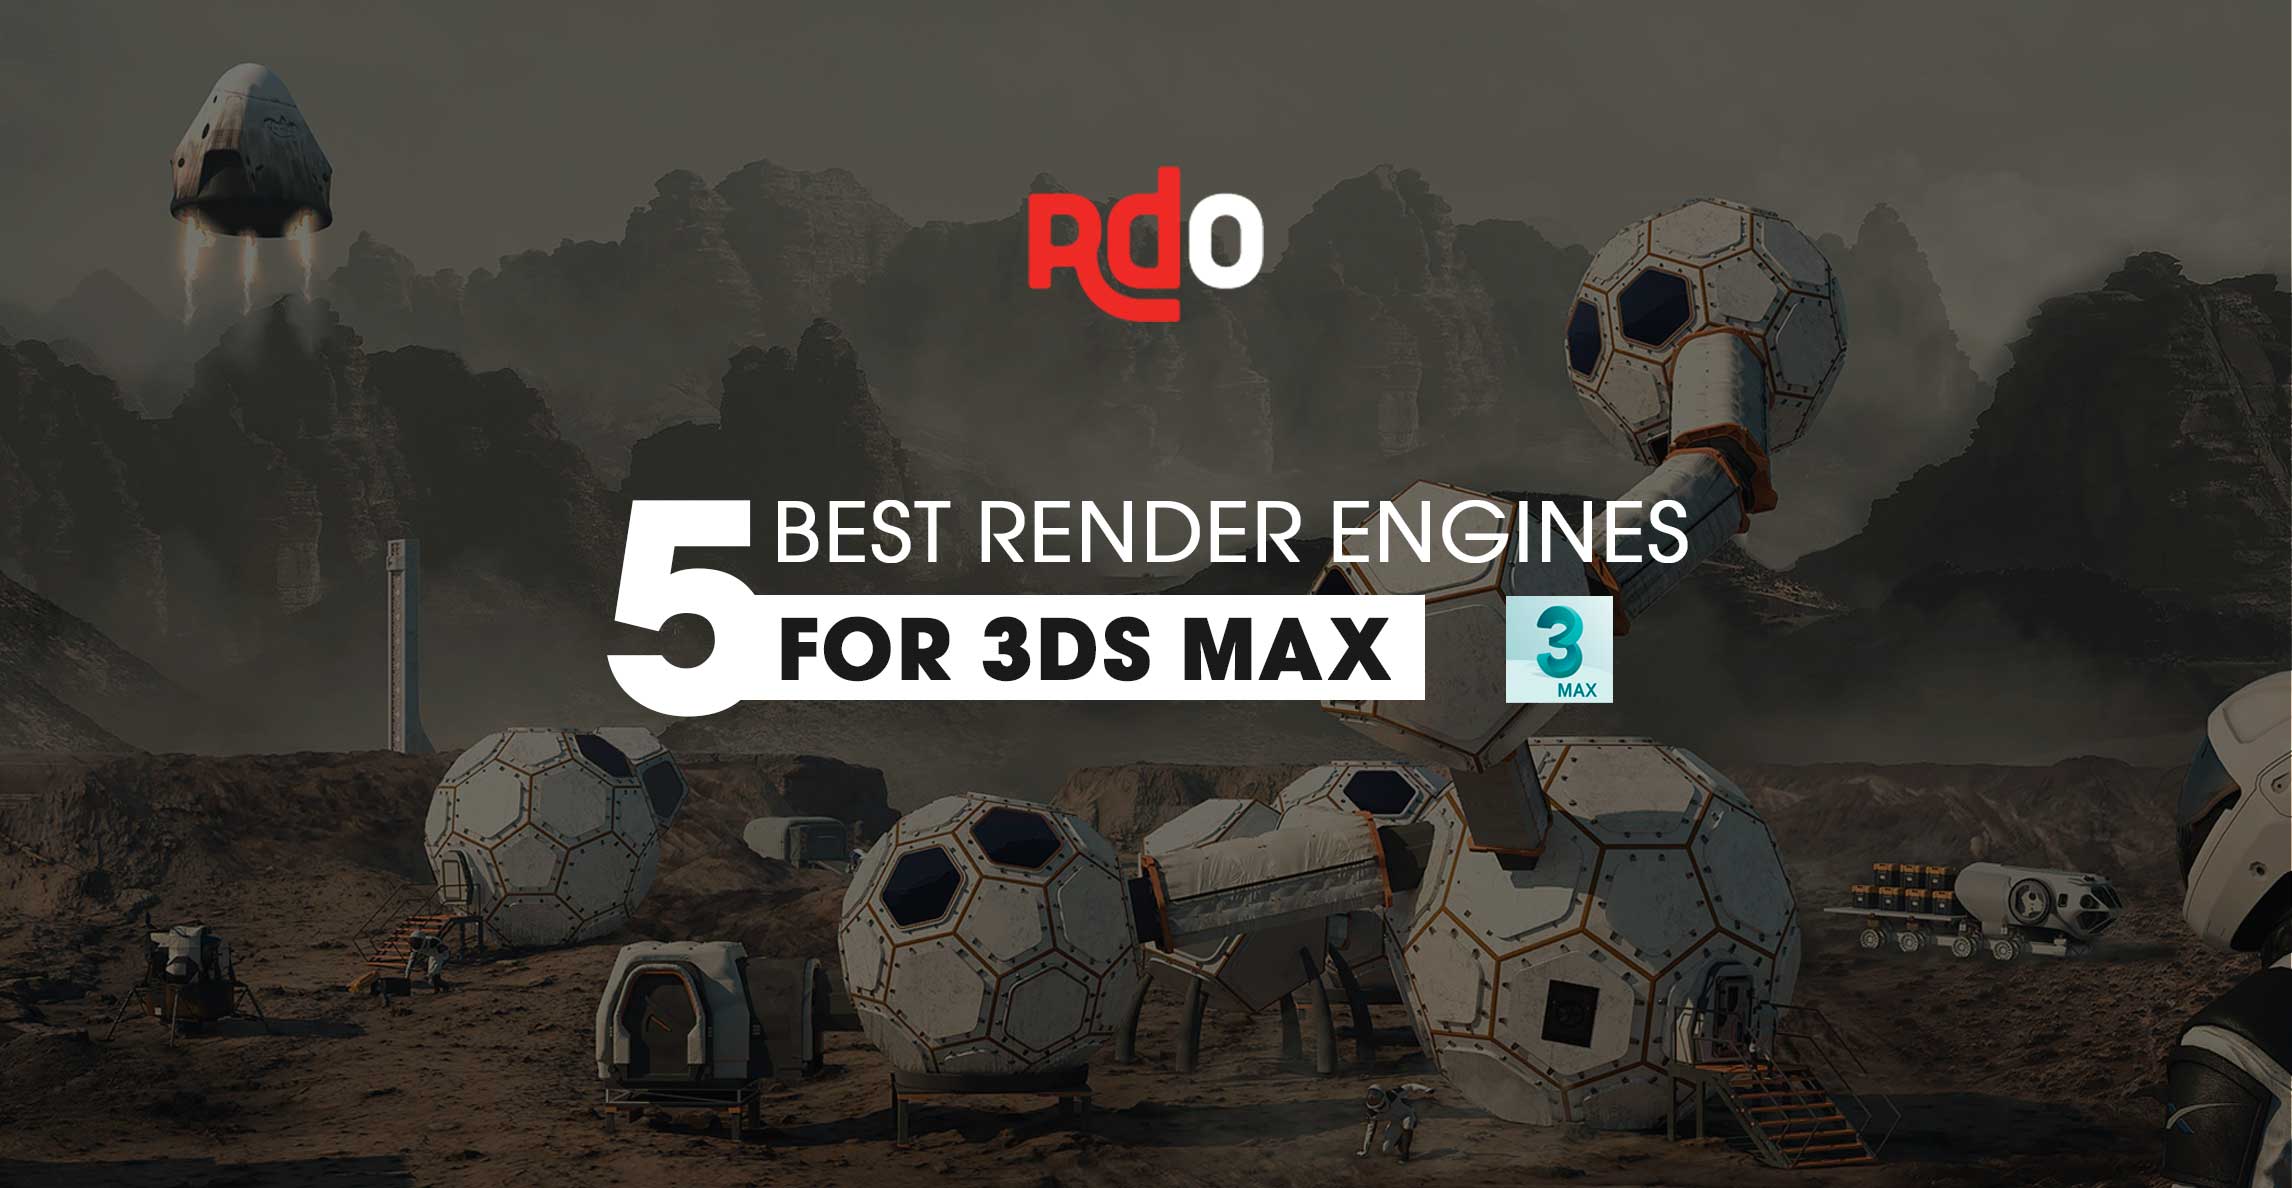 5 best render engines for 3ds Max